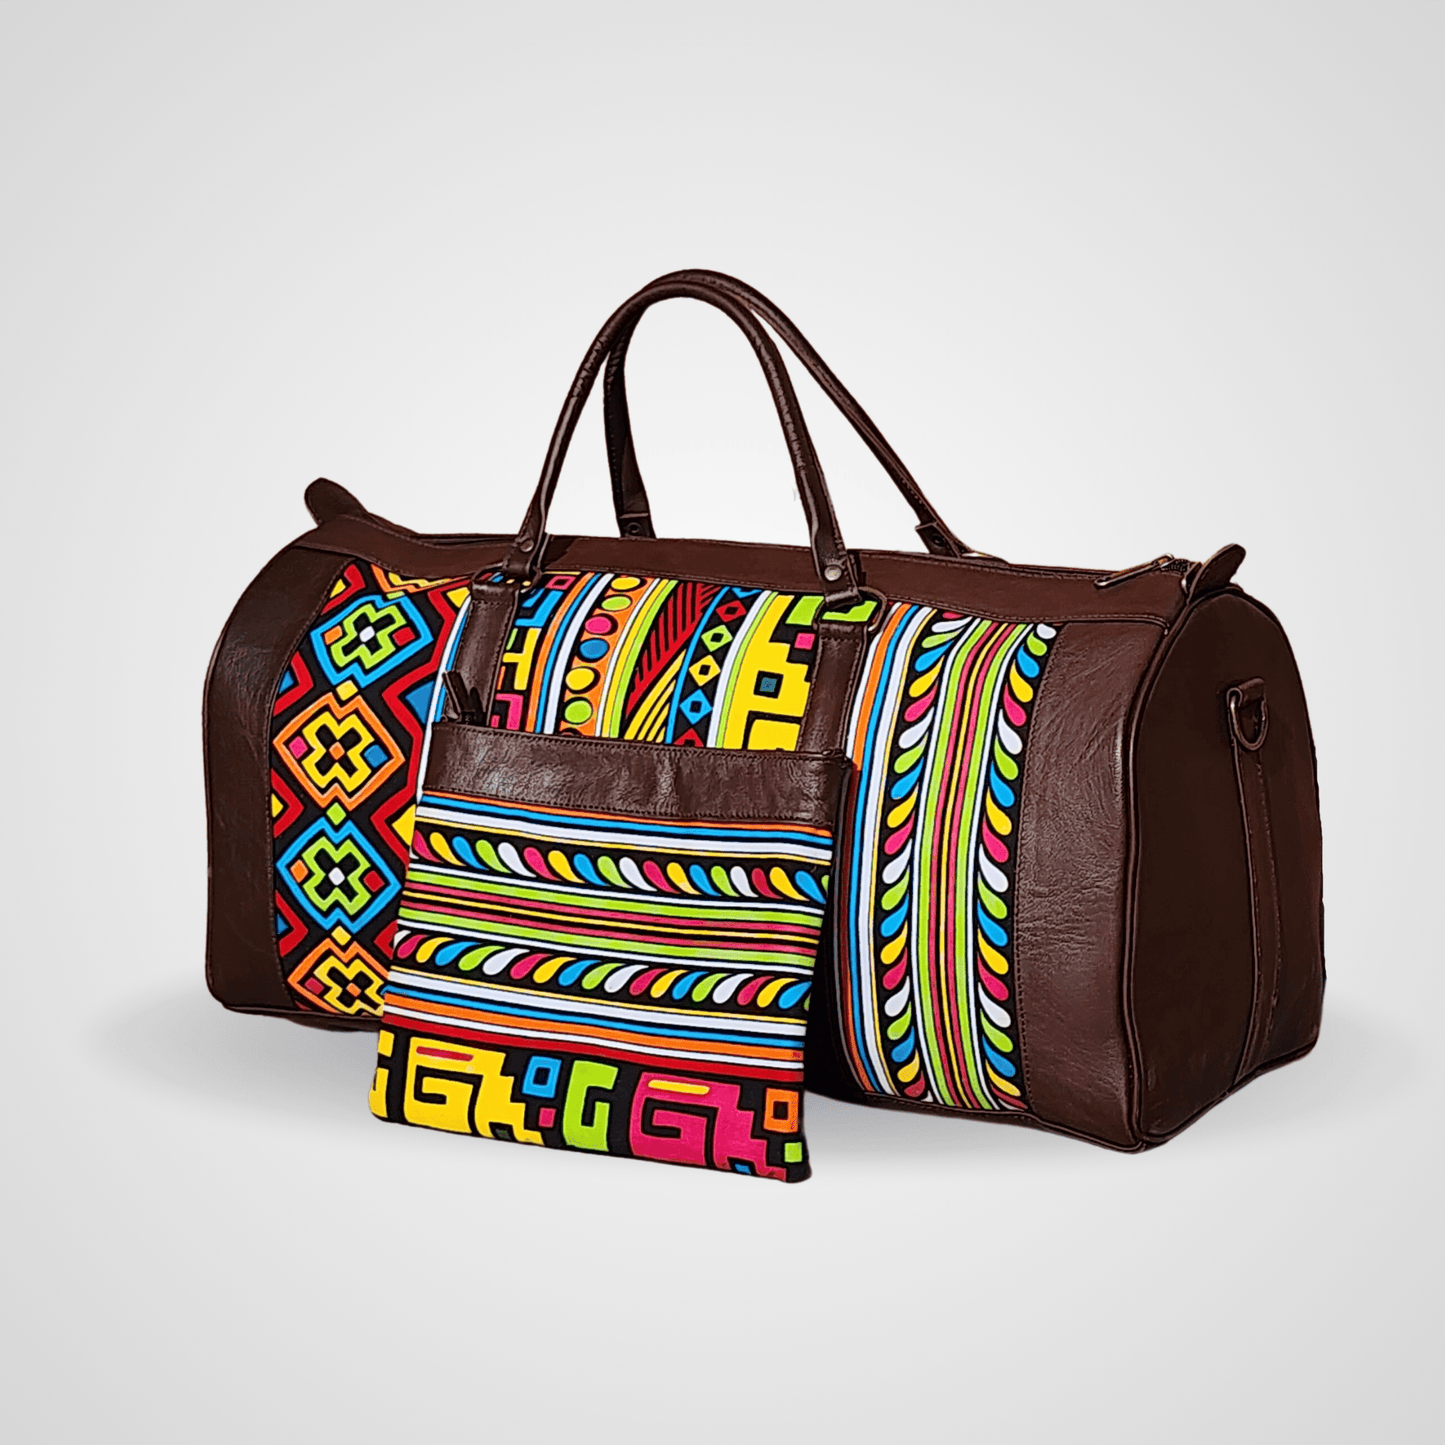 "Rainbow" Leather Duffle Bag With Matched Clutch - Trendiesty Worldwide